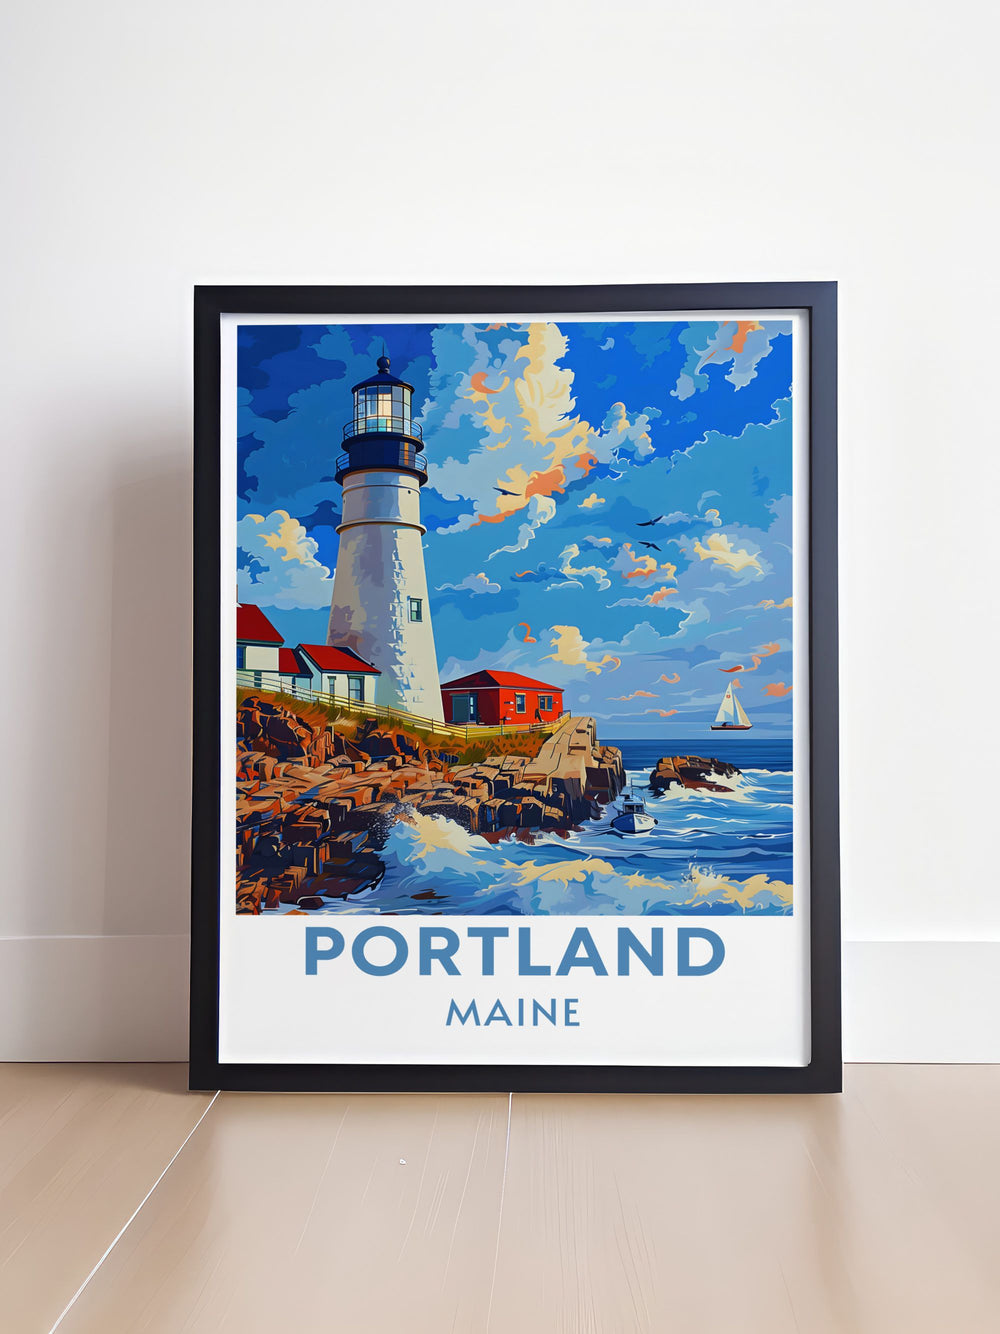 This art print celebrates Maines stunning coastline, with its rocky shores and serene beaches, making it an ideal piece for those who cherish the tranquil ambiance of the sea.